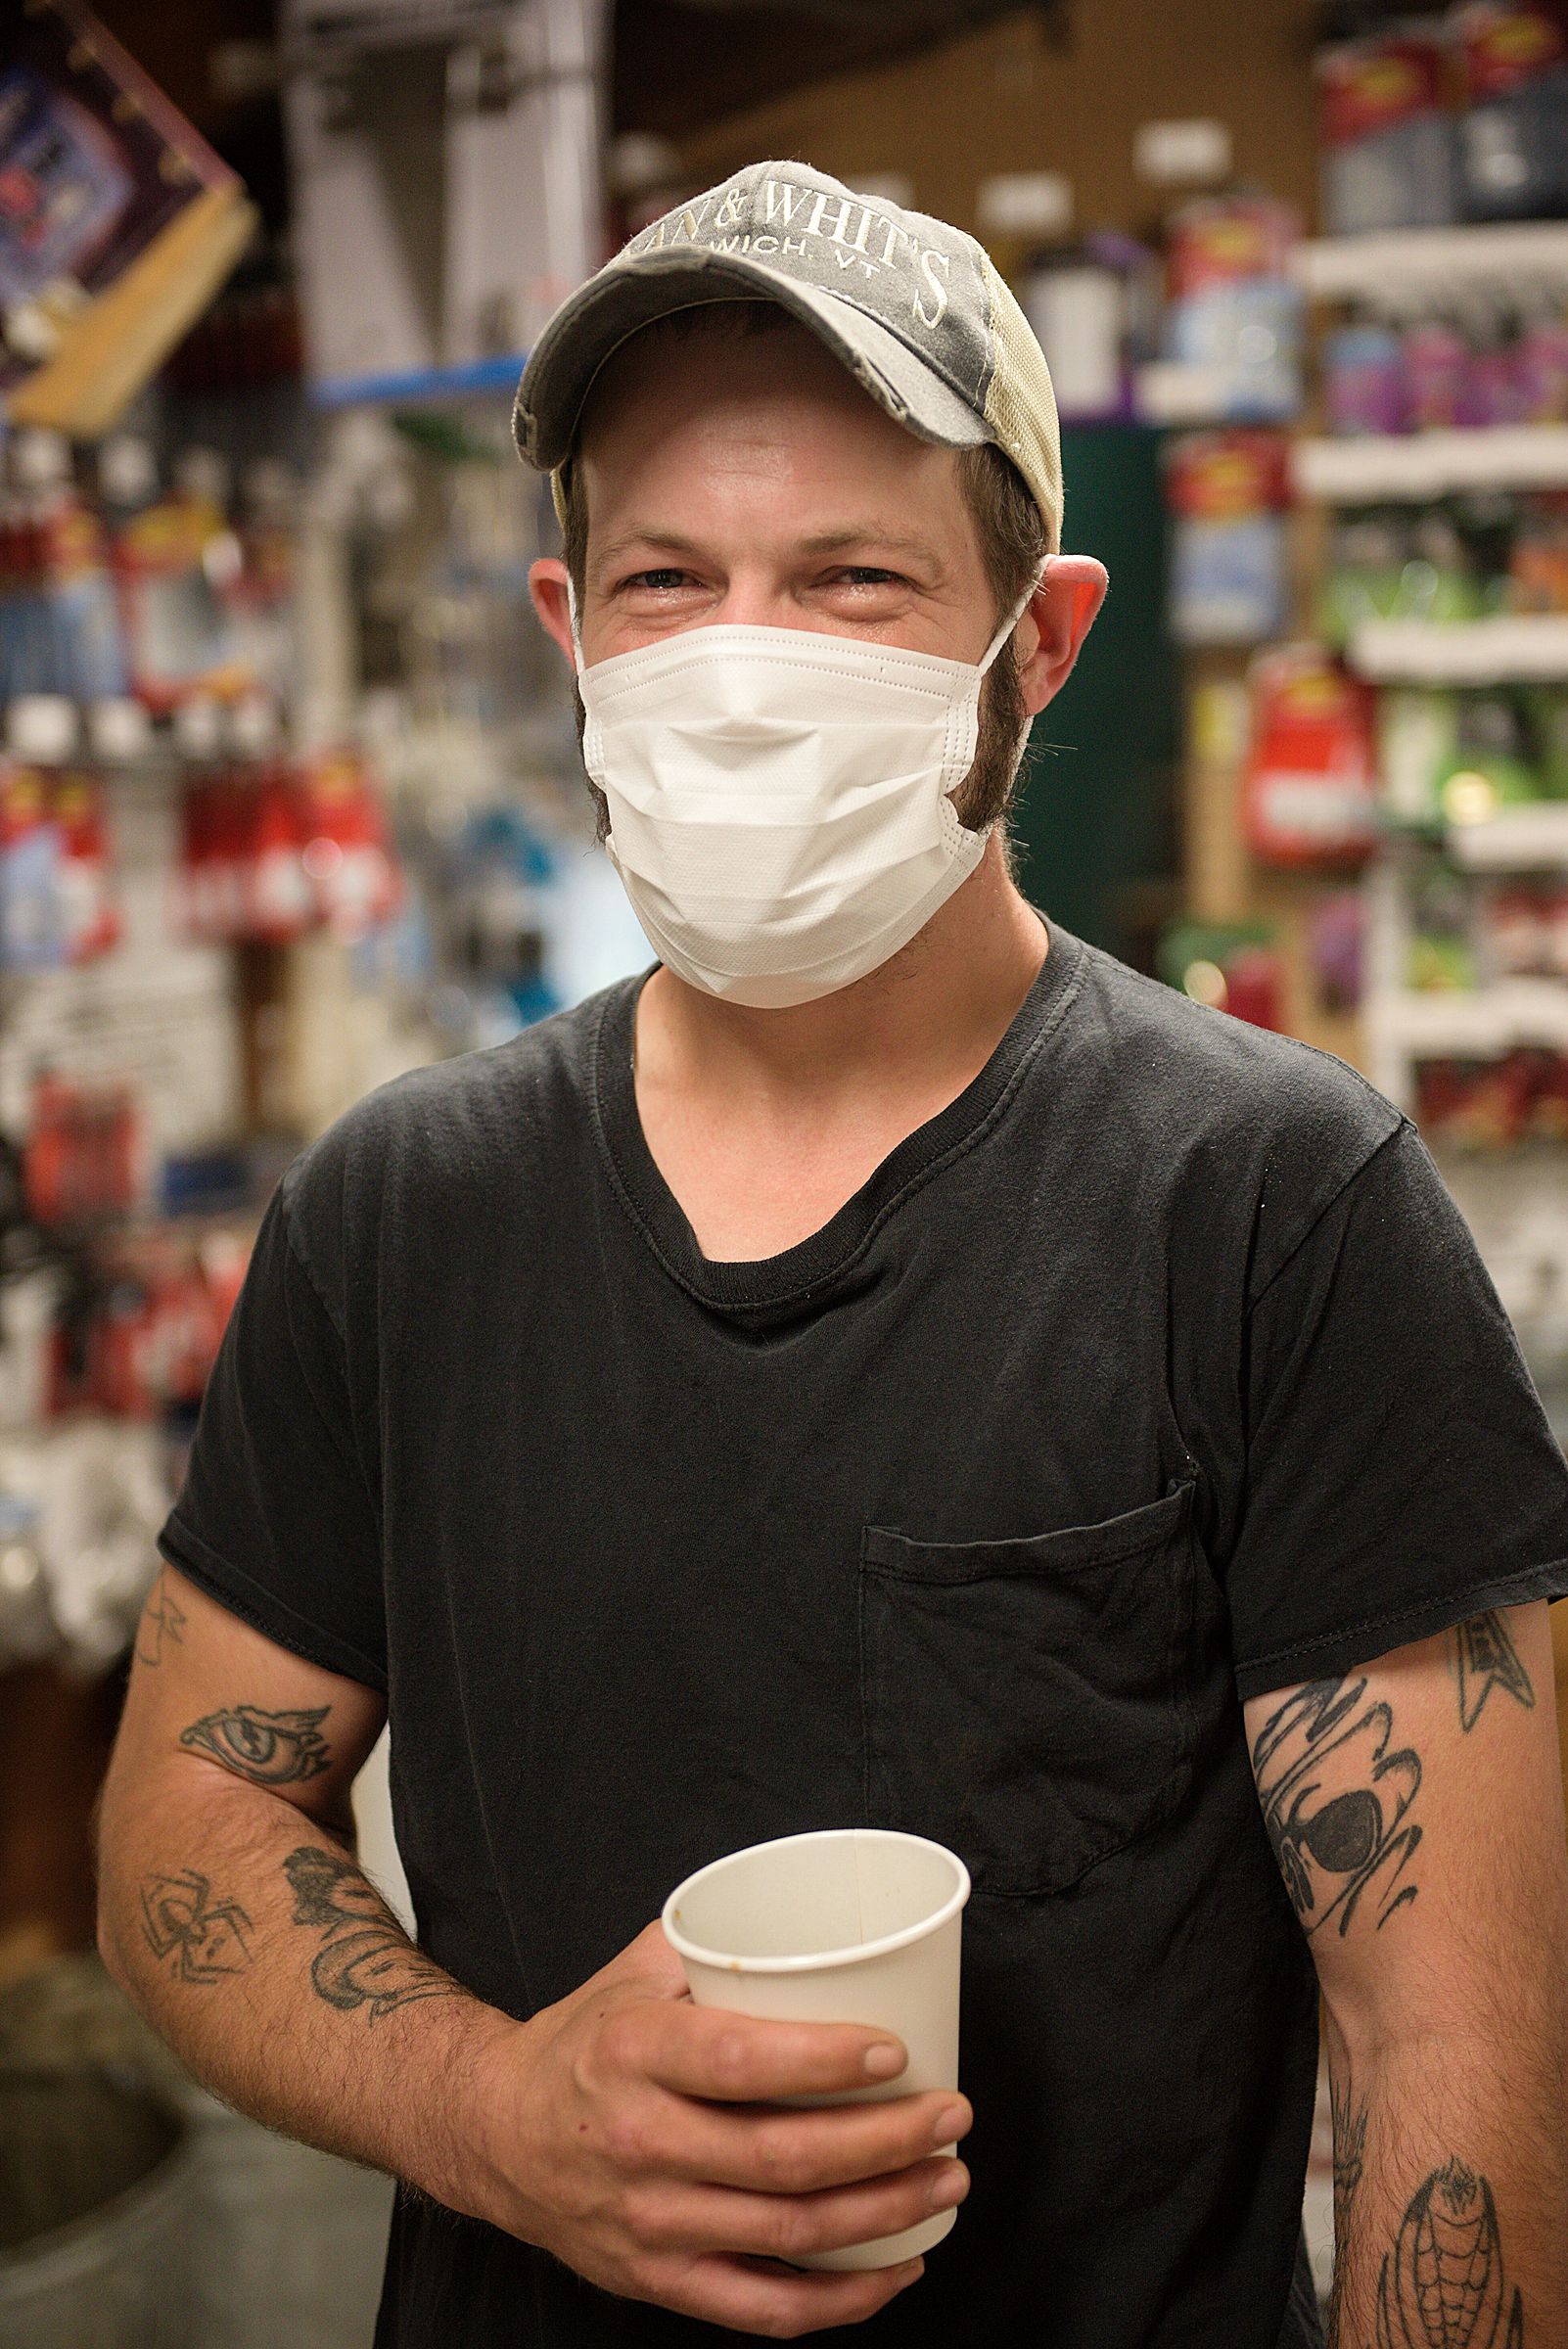 Nate Doody, of Norwich, stands for a portrait at the start of his work day at Dan and Whit’s general store in Norwich, Vt., Thursday, July 9, 2020. (Valley News - James M. Patterson) Copyright Valley News. May not be reprinted or used online without permission. Send requests to permission@vnews.com.